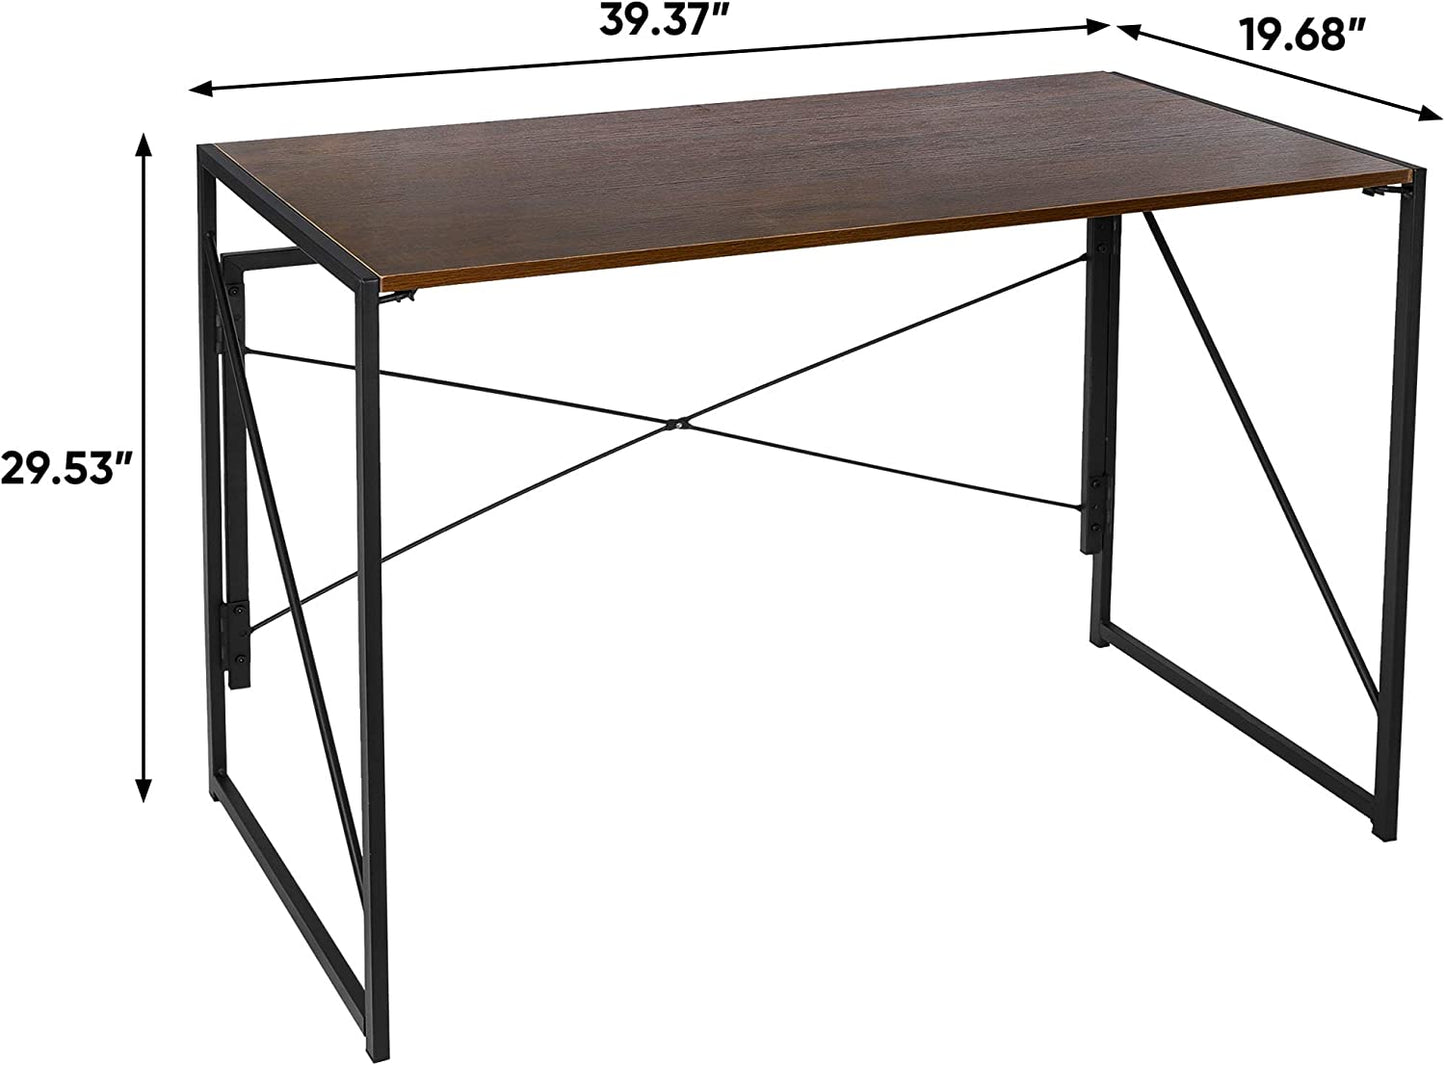 Folding Computer Desk 39'' Sturdy Writing Desk Gaming Desk Home Office PC Laptop Foldable Table Modern Simple Small Study Desk Steel Frame